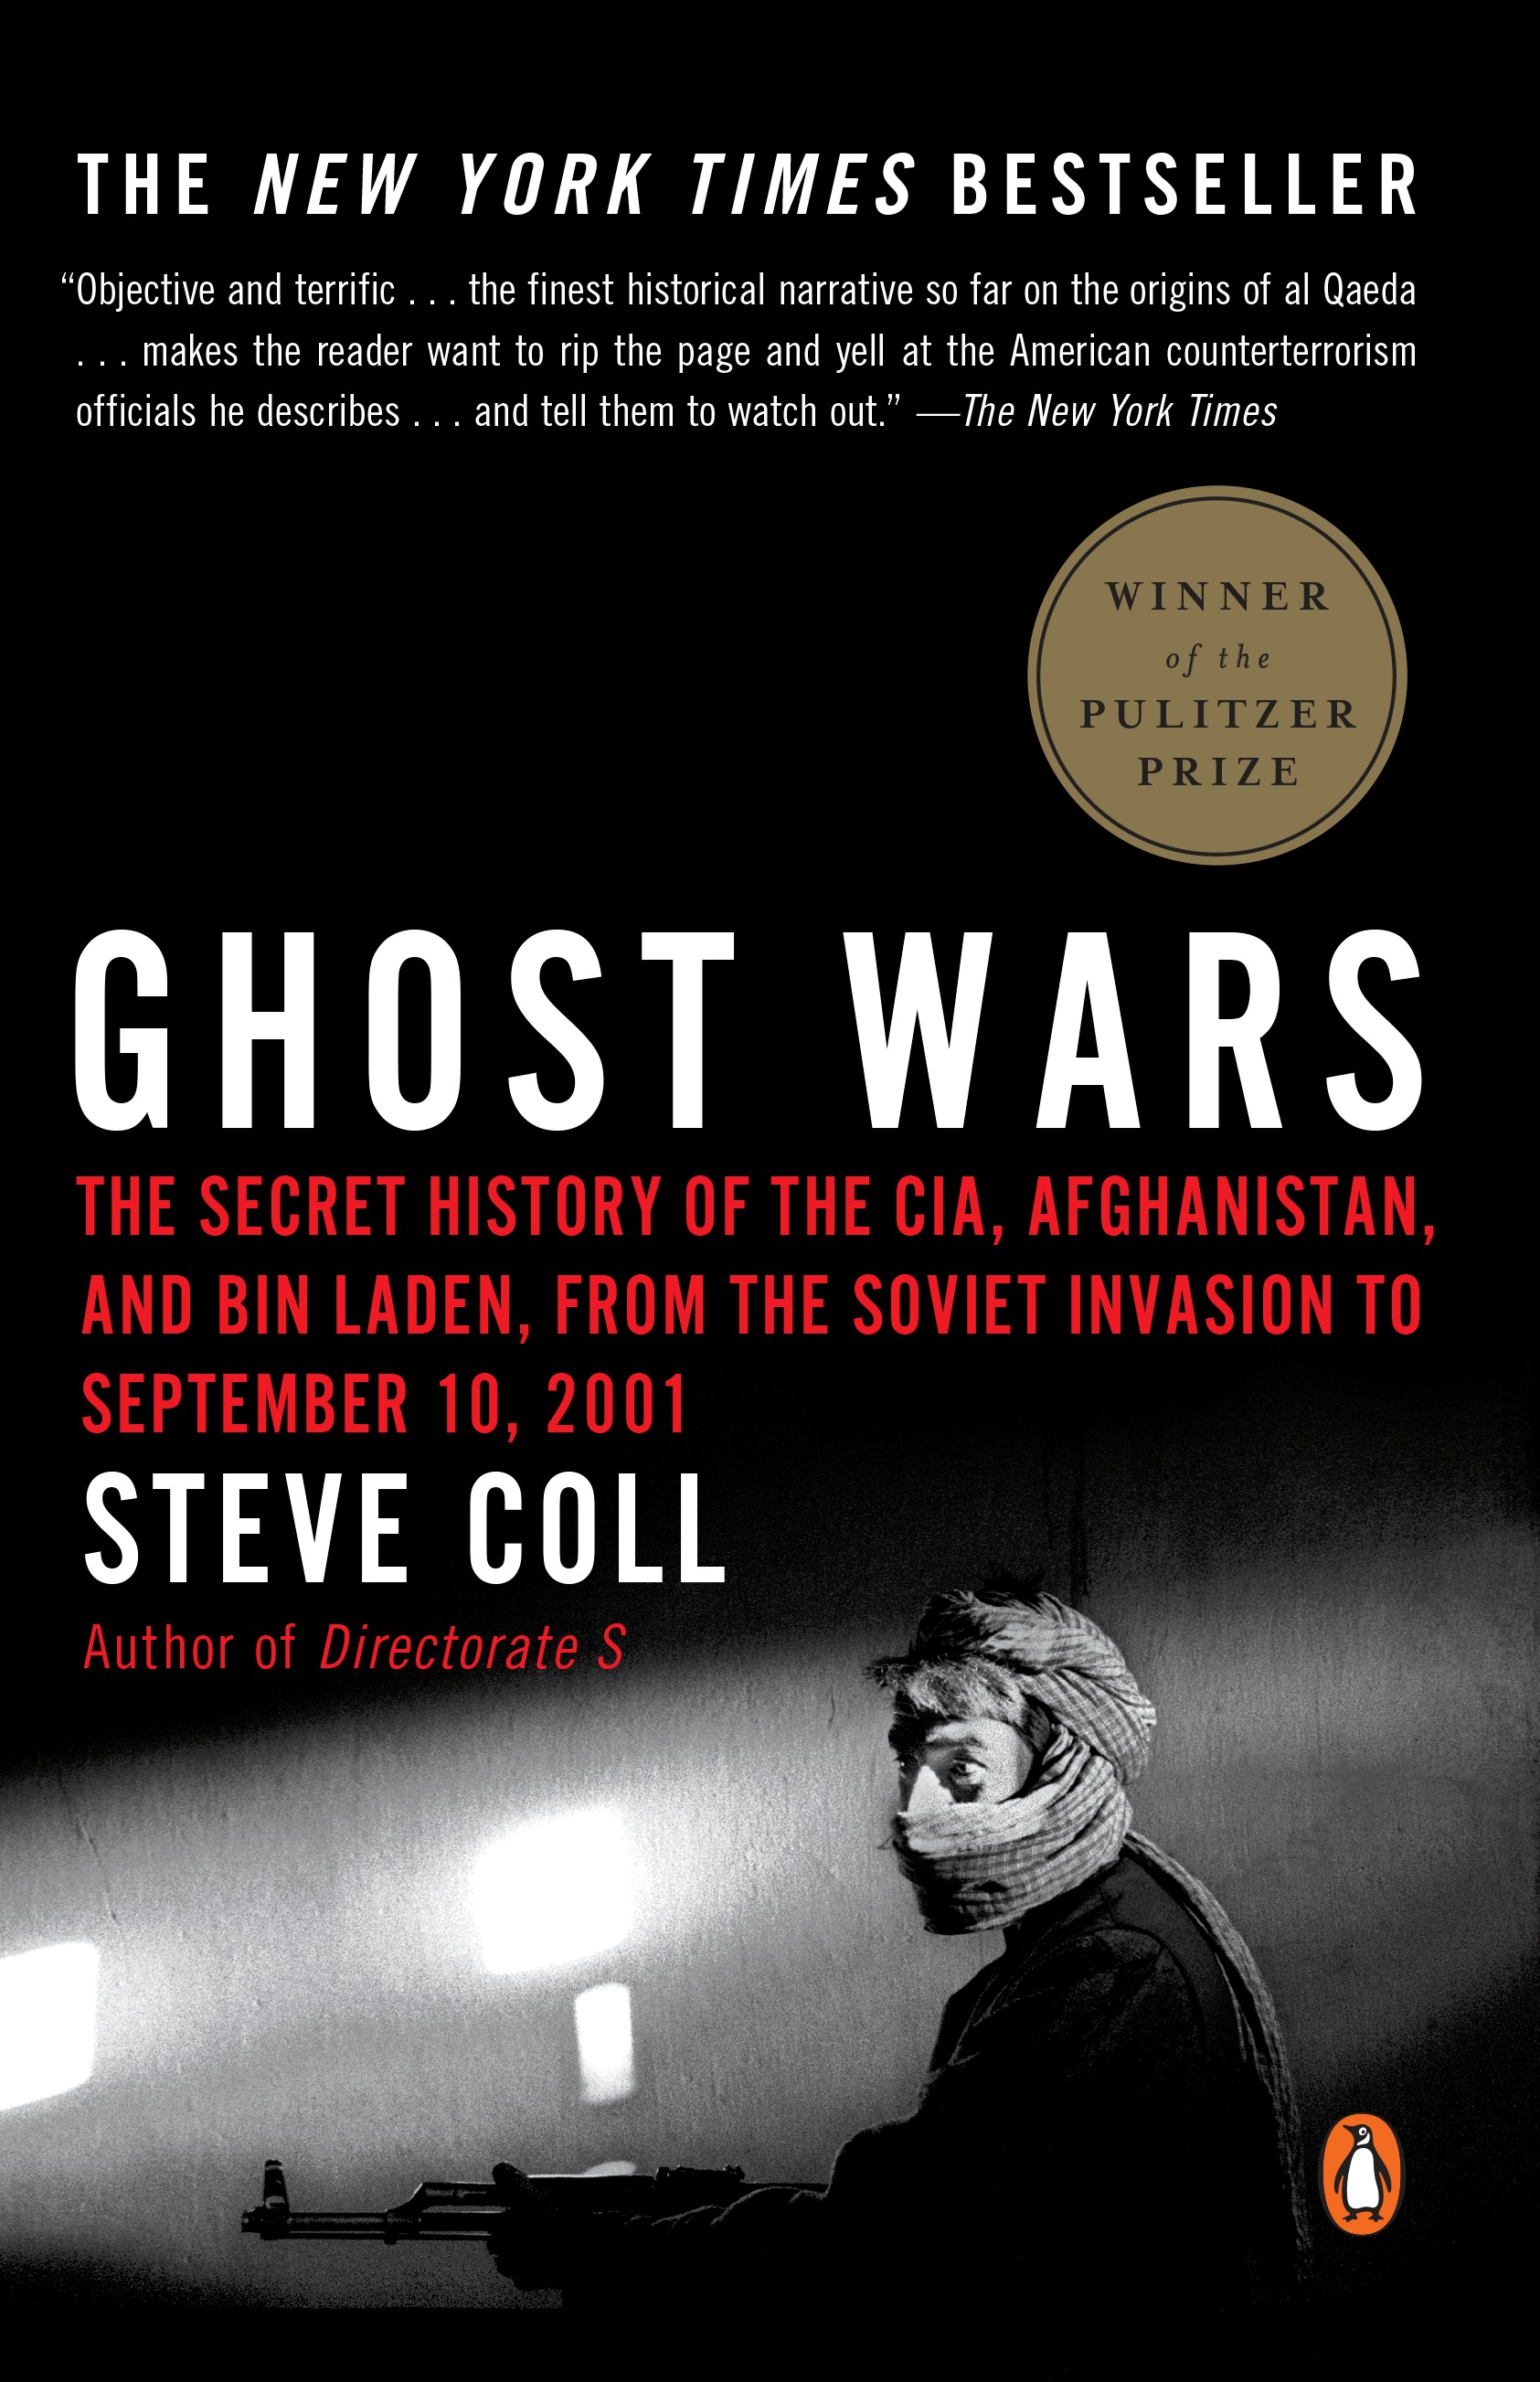 Ghost Wars : The Secret History of the CIA, Afghanistan, and bin Laden, from the Soviet Invas ion to September 10, 2001 | Coll, Steve